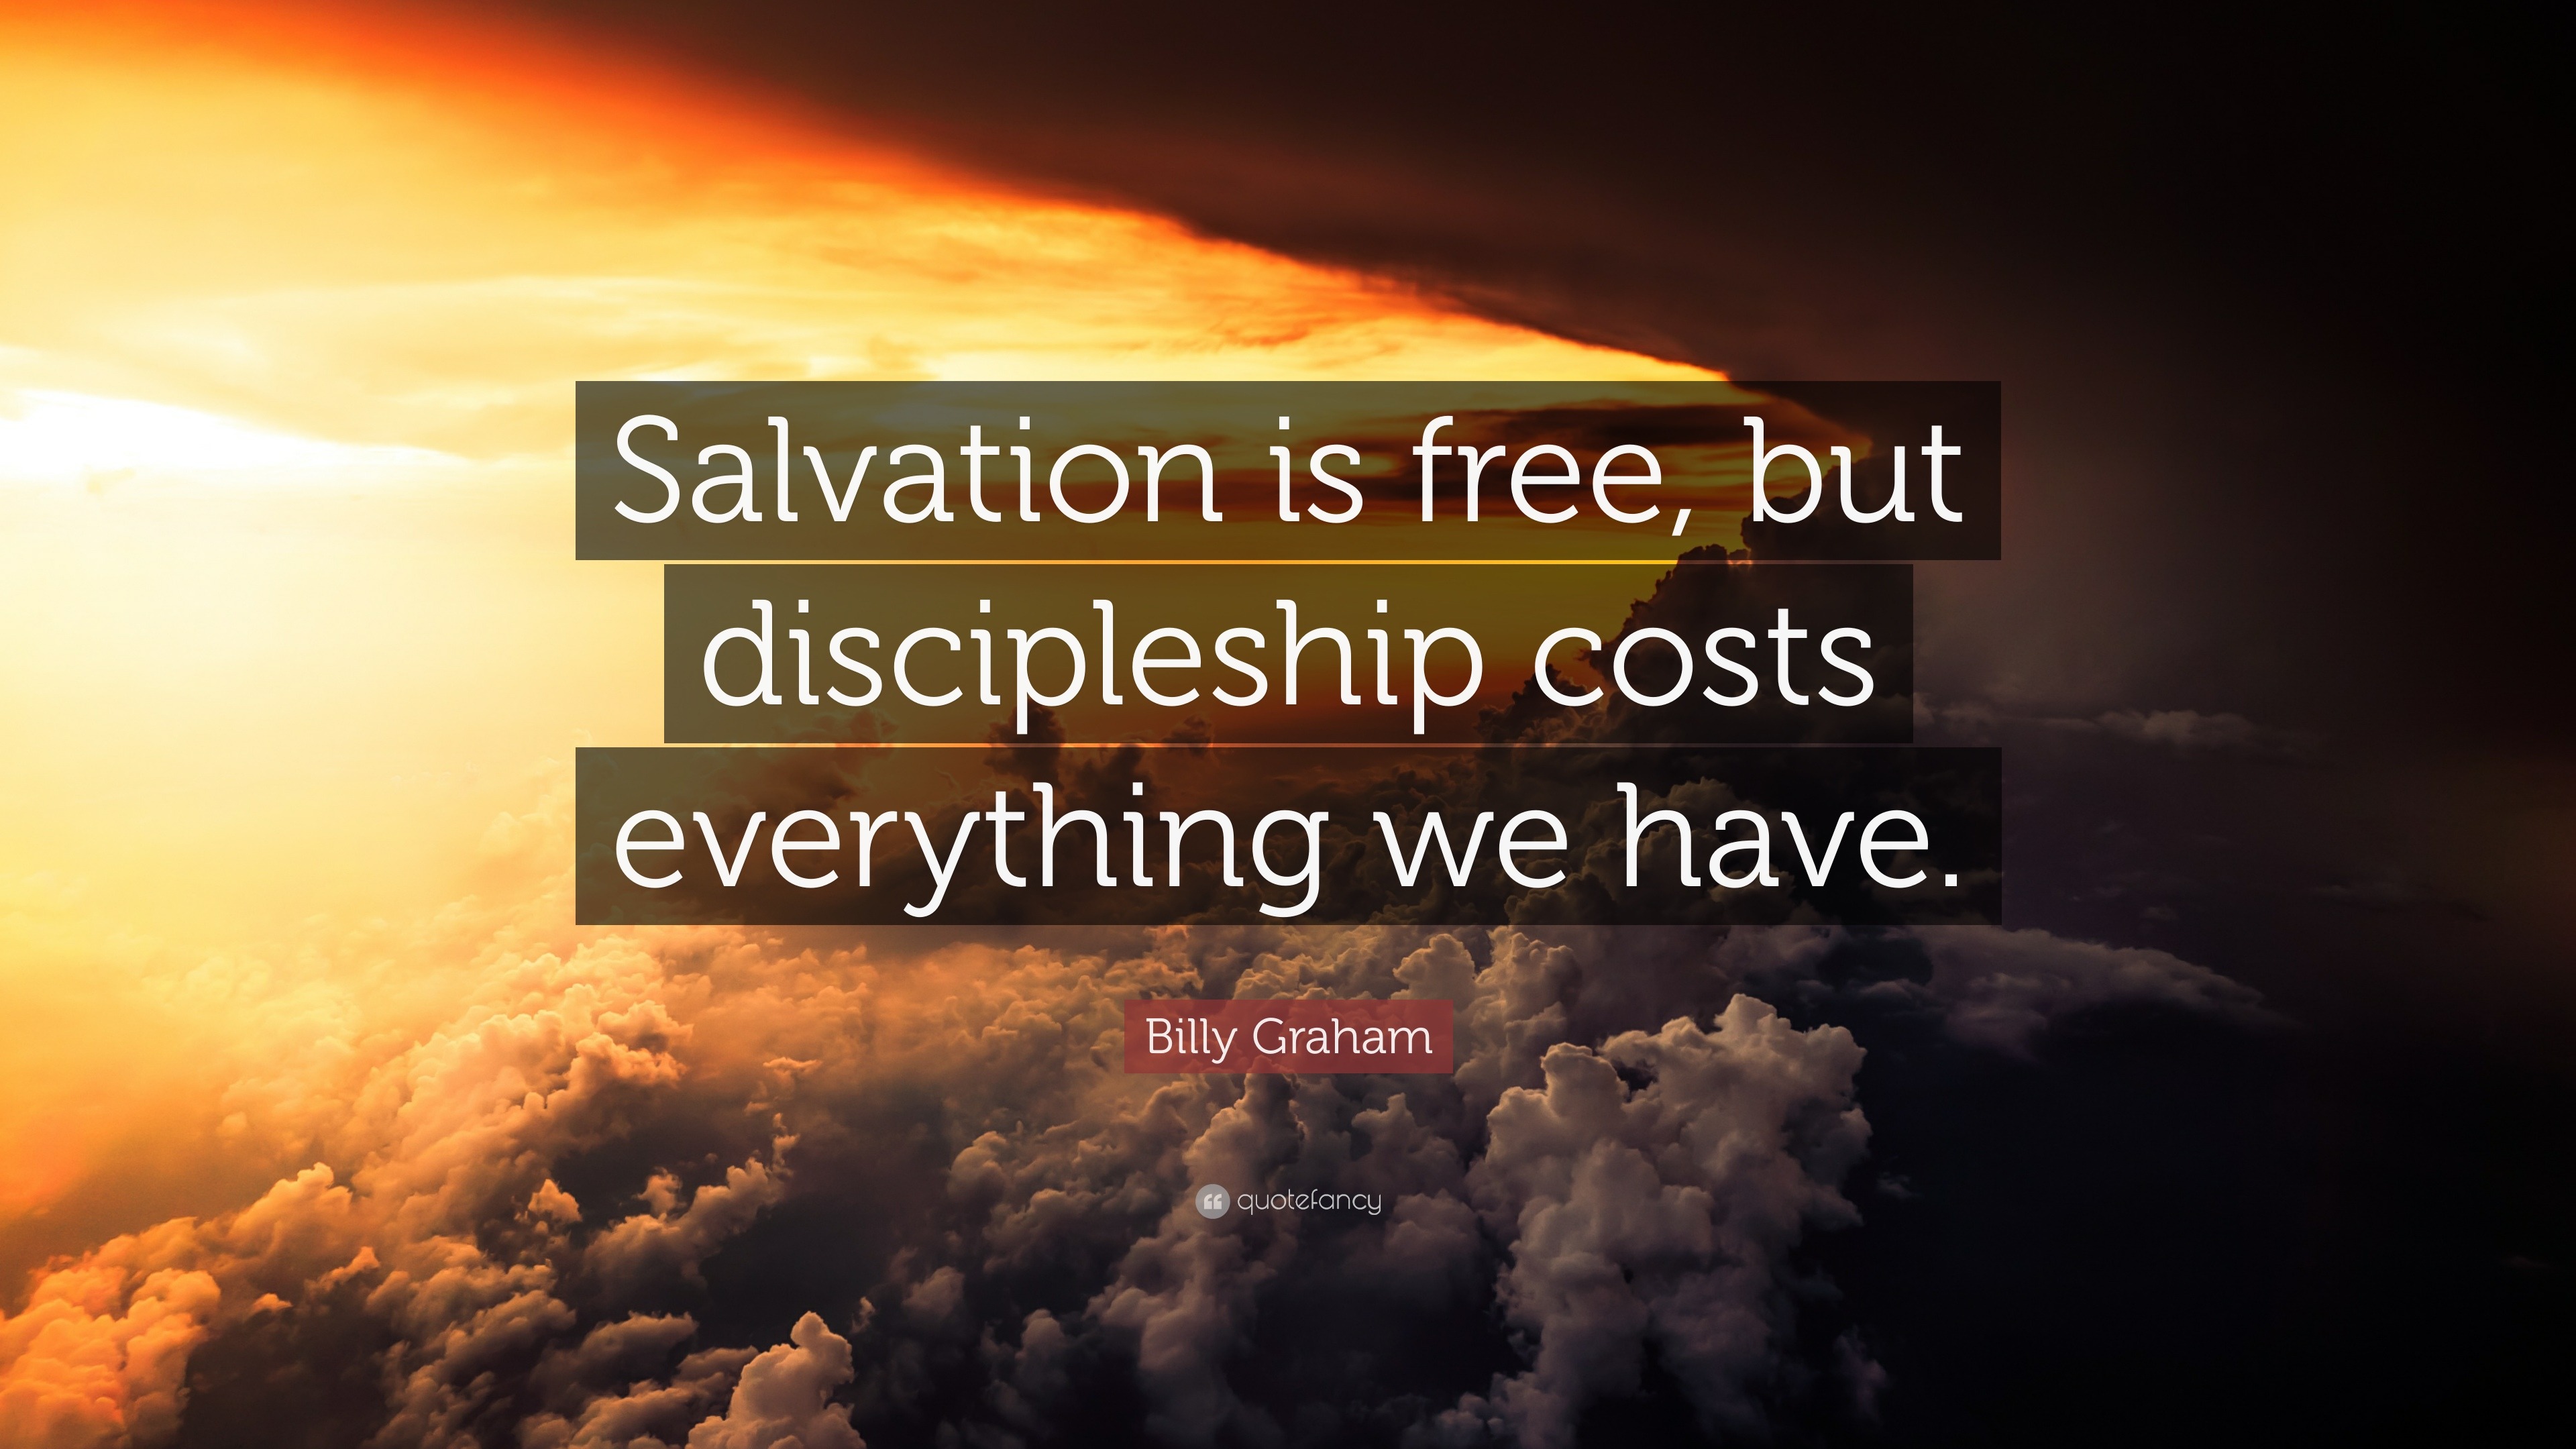 Billy Graham Quote: “Salvation is free, but discipleship costs